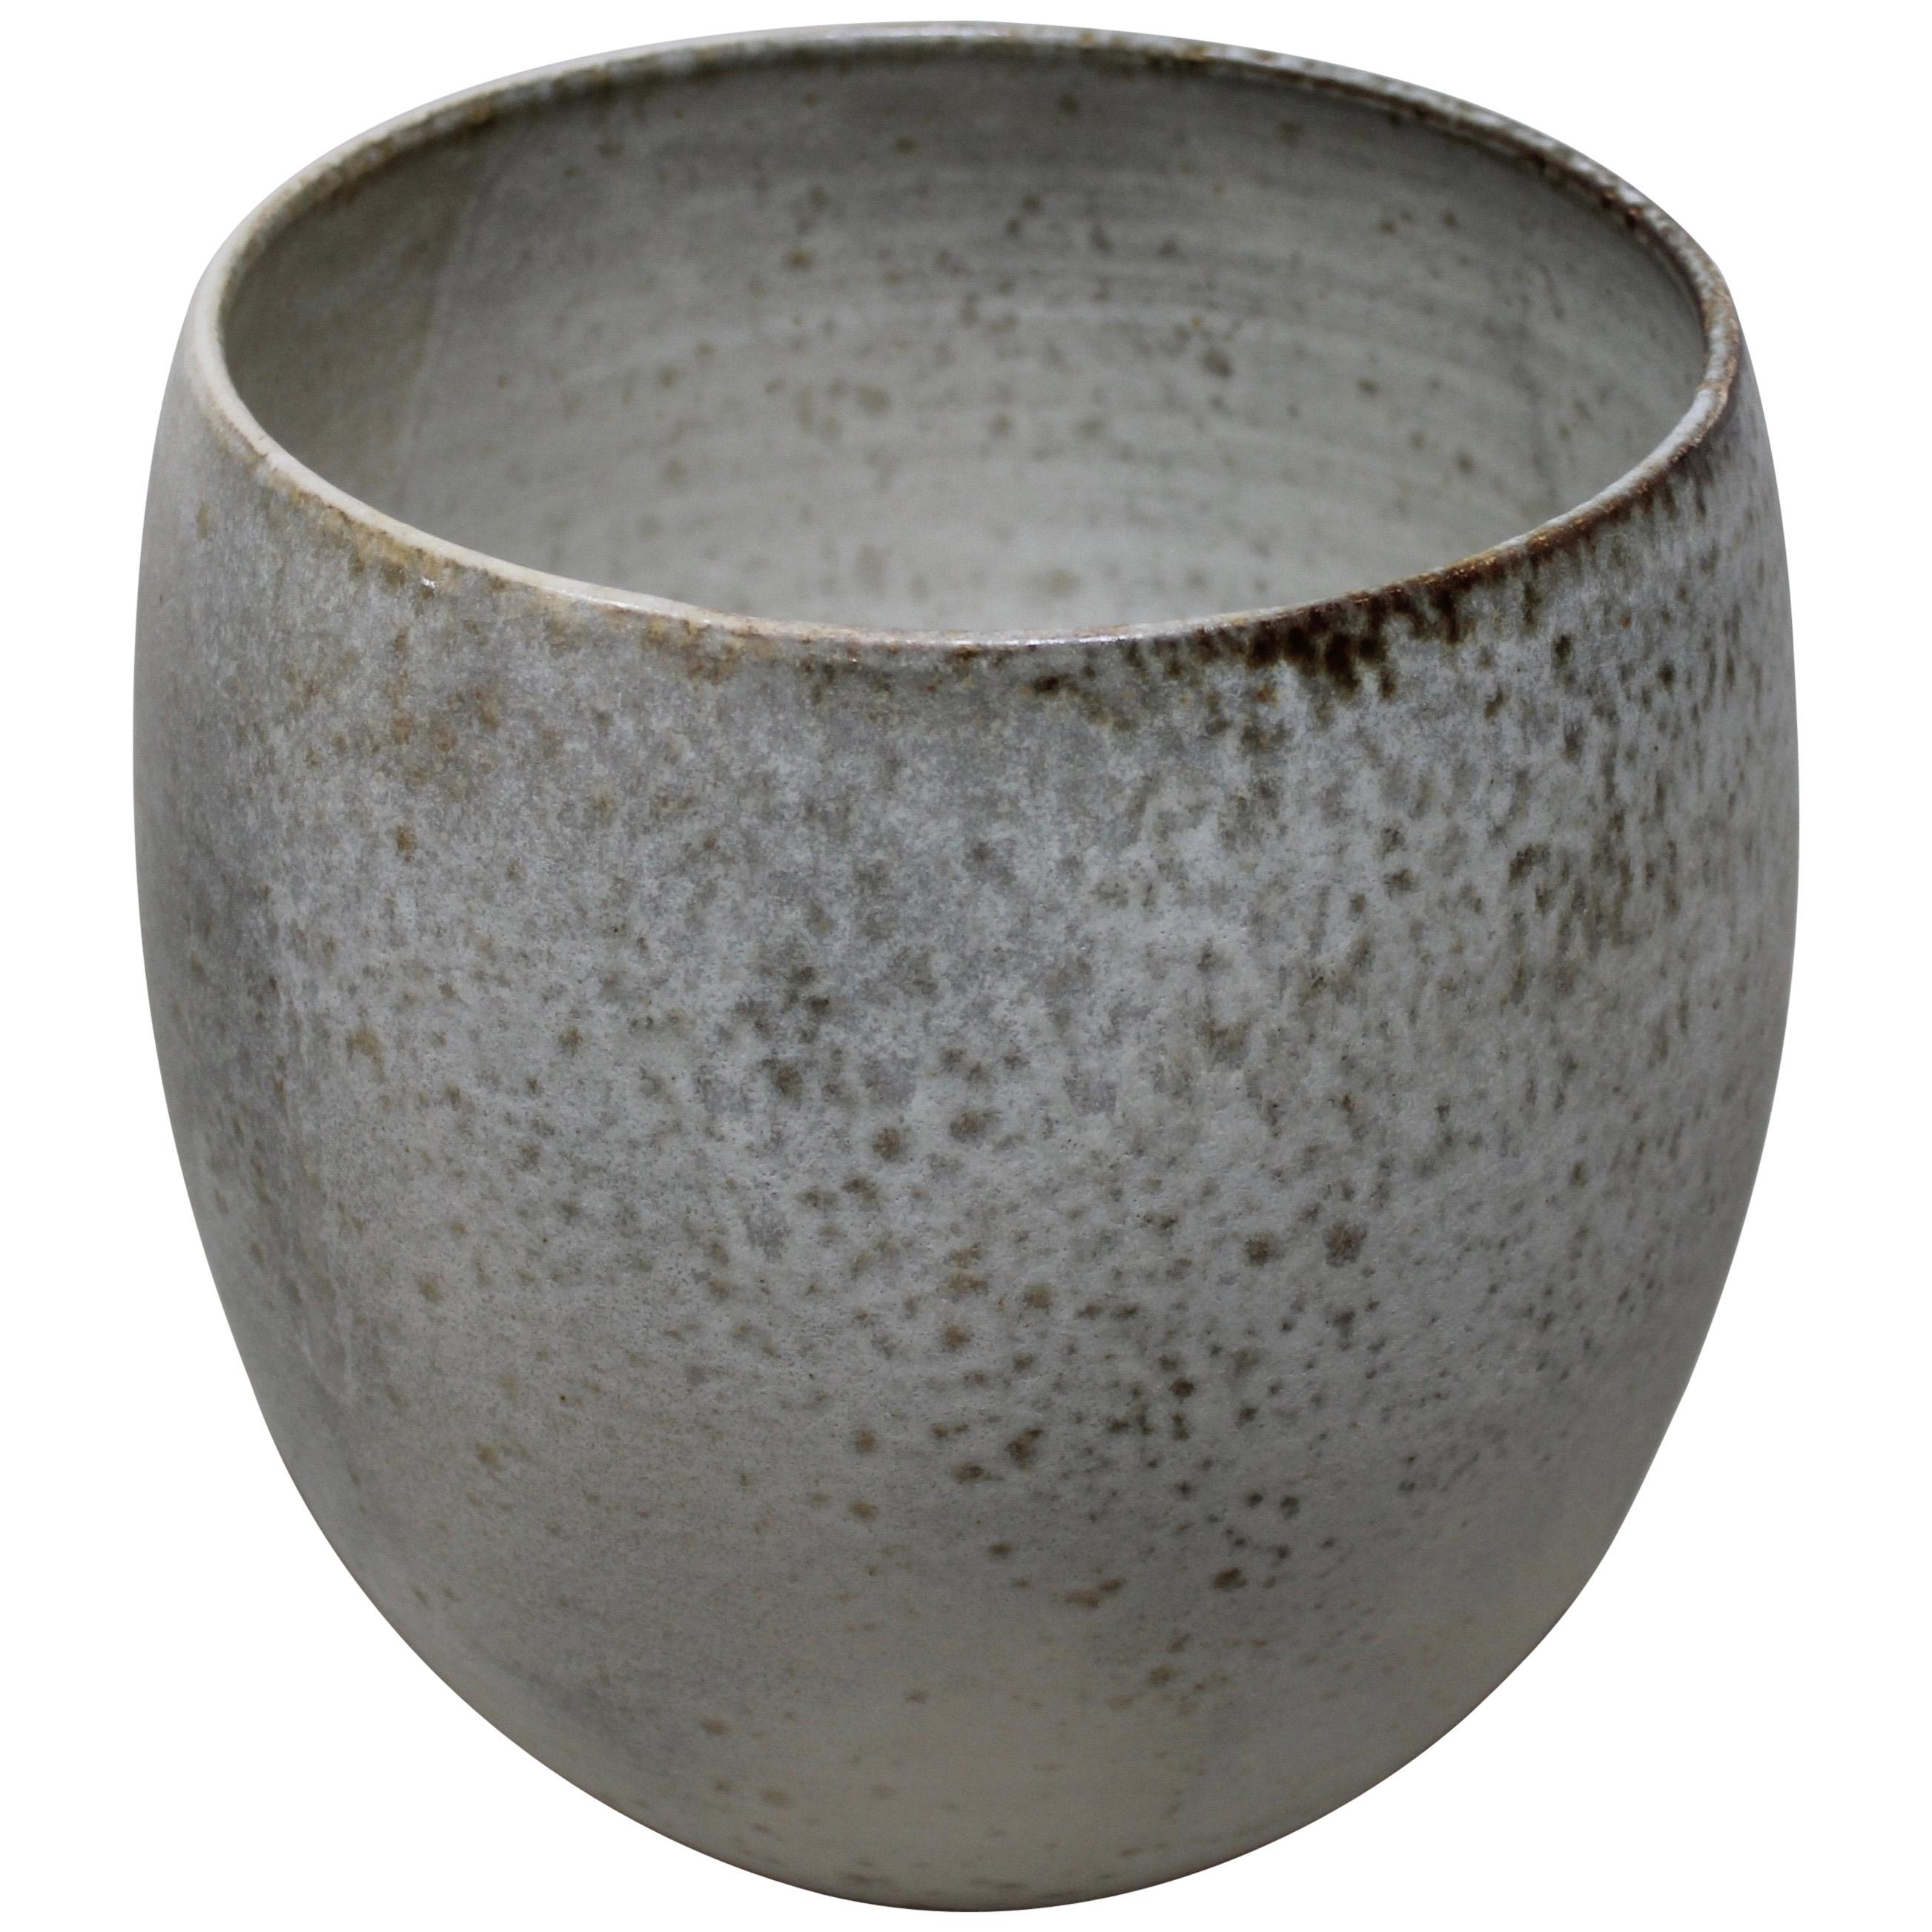 KH Würtz Curvaceous Bell Shaped Planter in Fawn Glaze